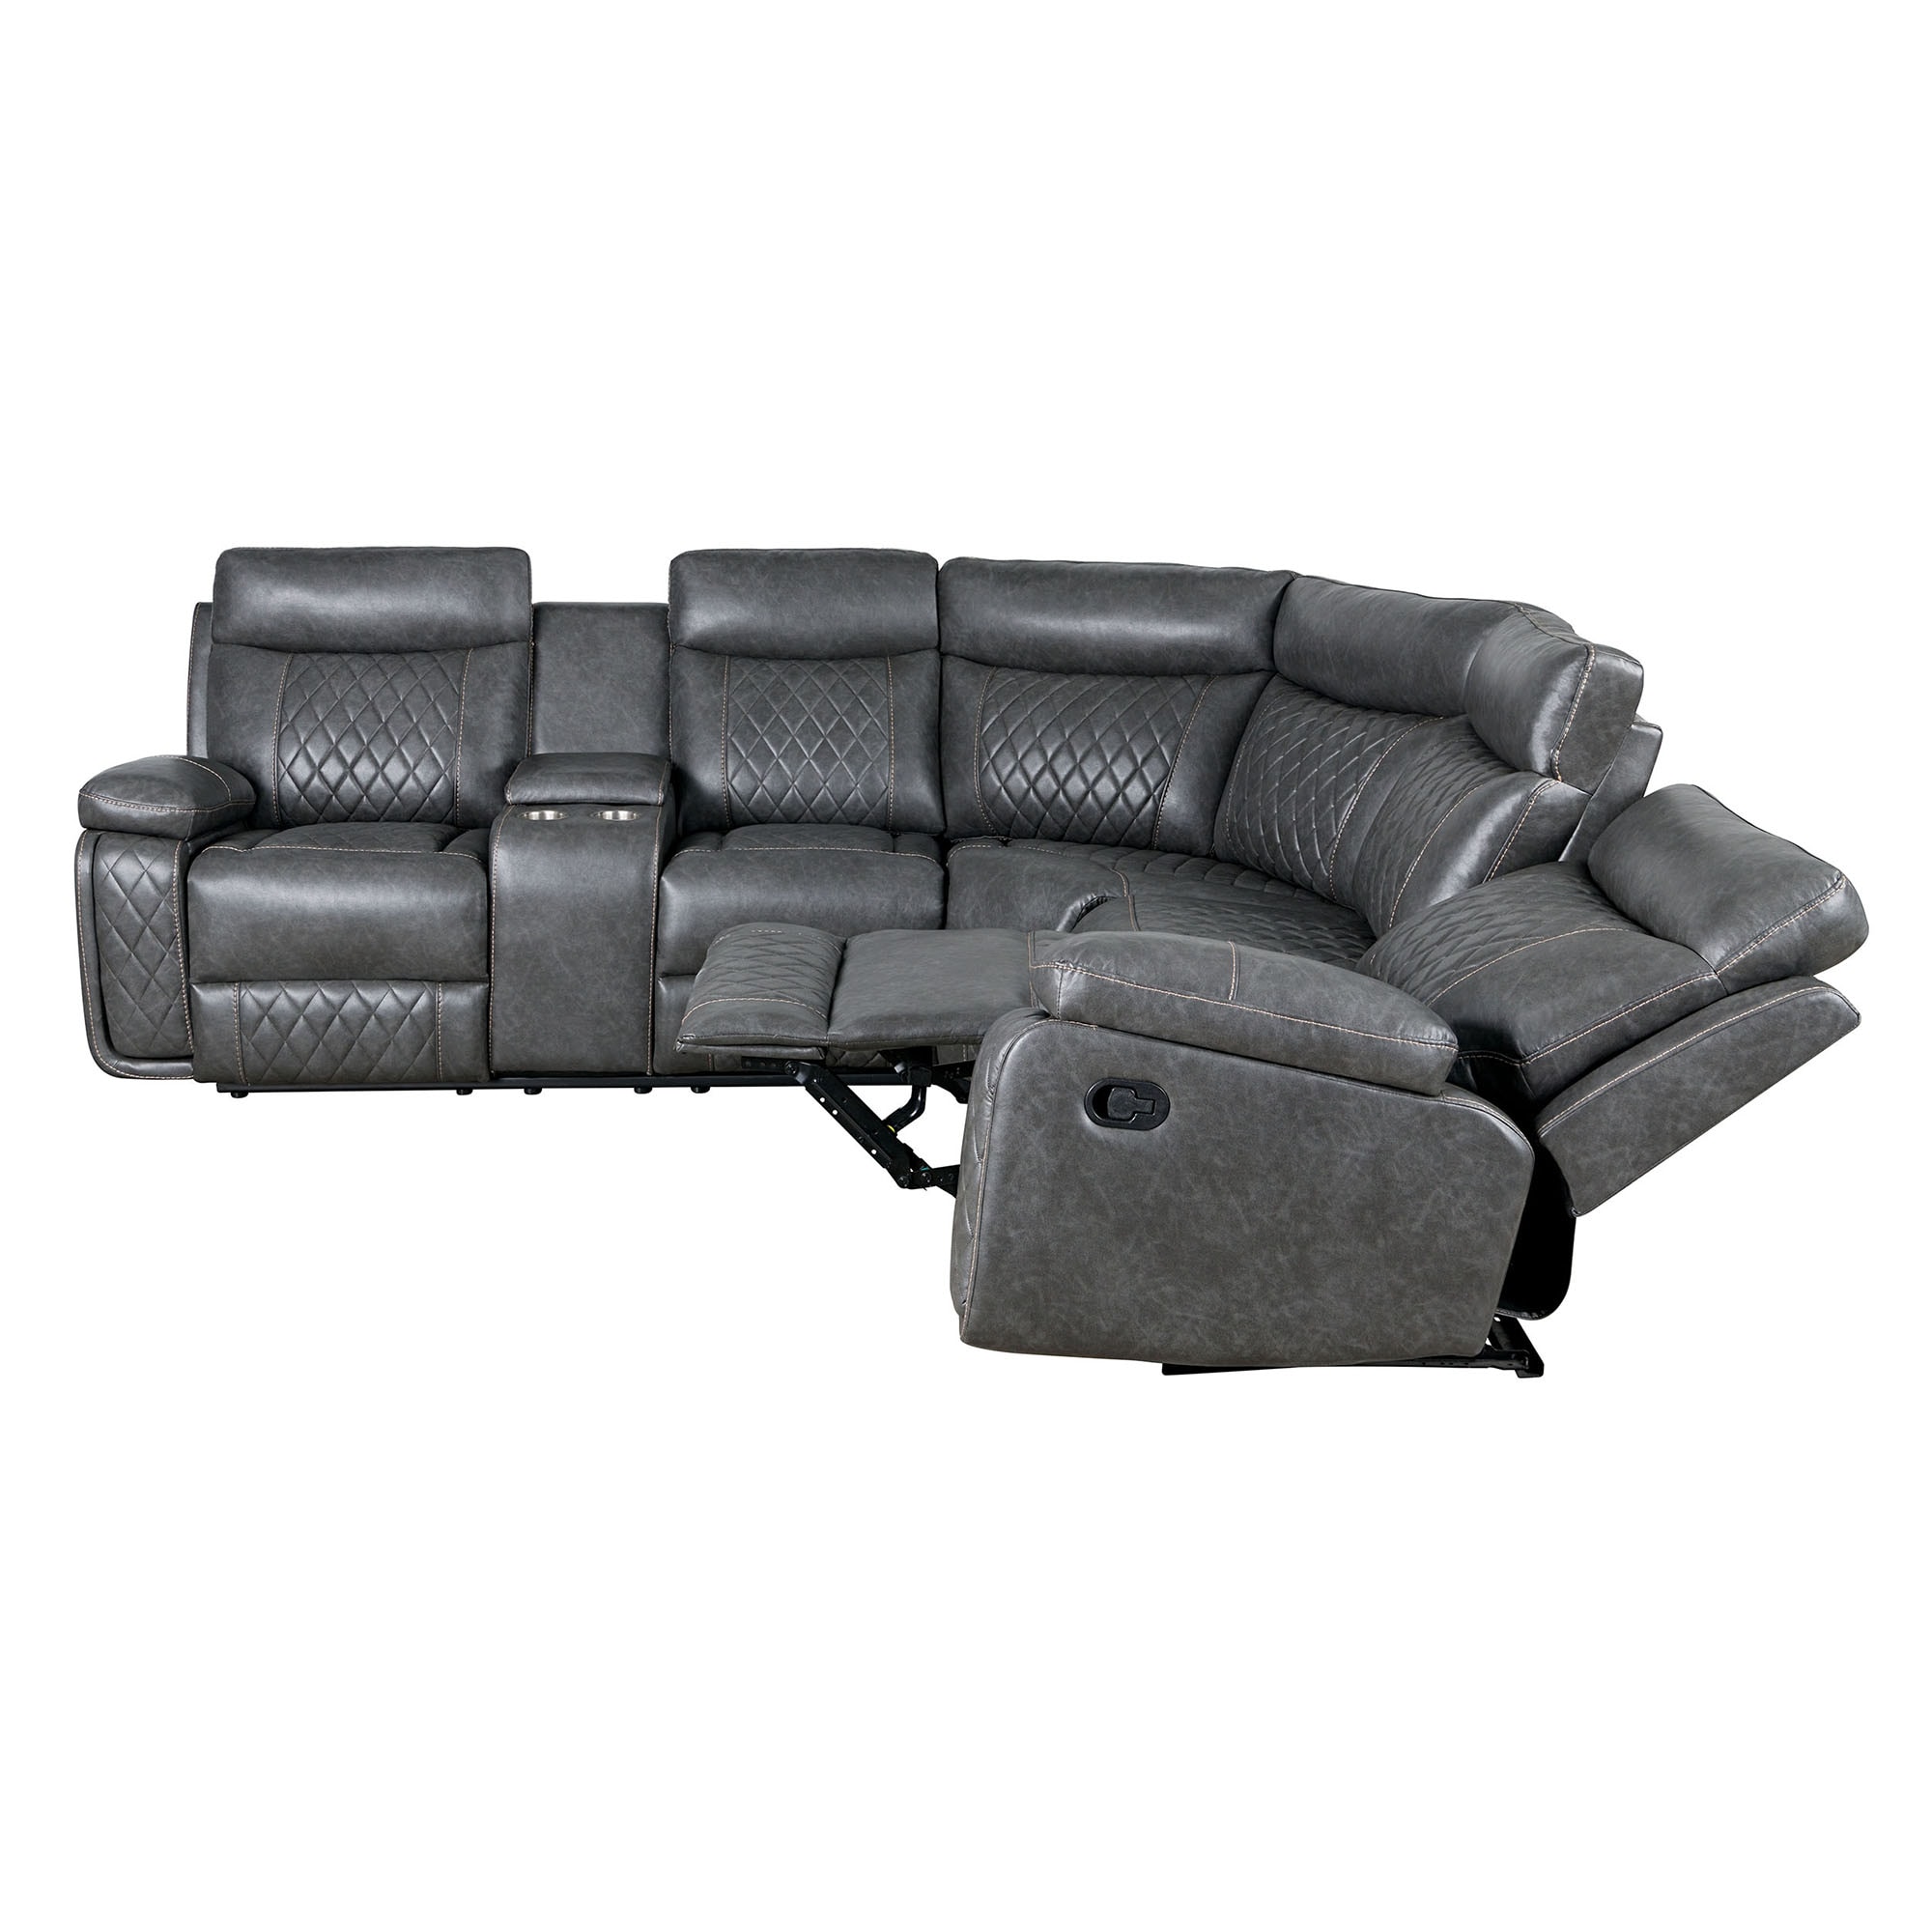 Clihome PU Reclining Sofa 99.6-in Casual Gray Faux Leather 5-seater ...